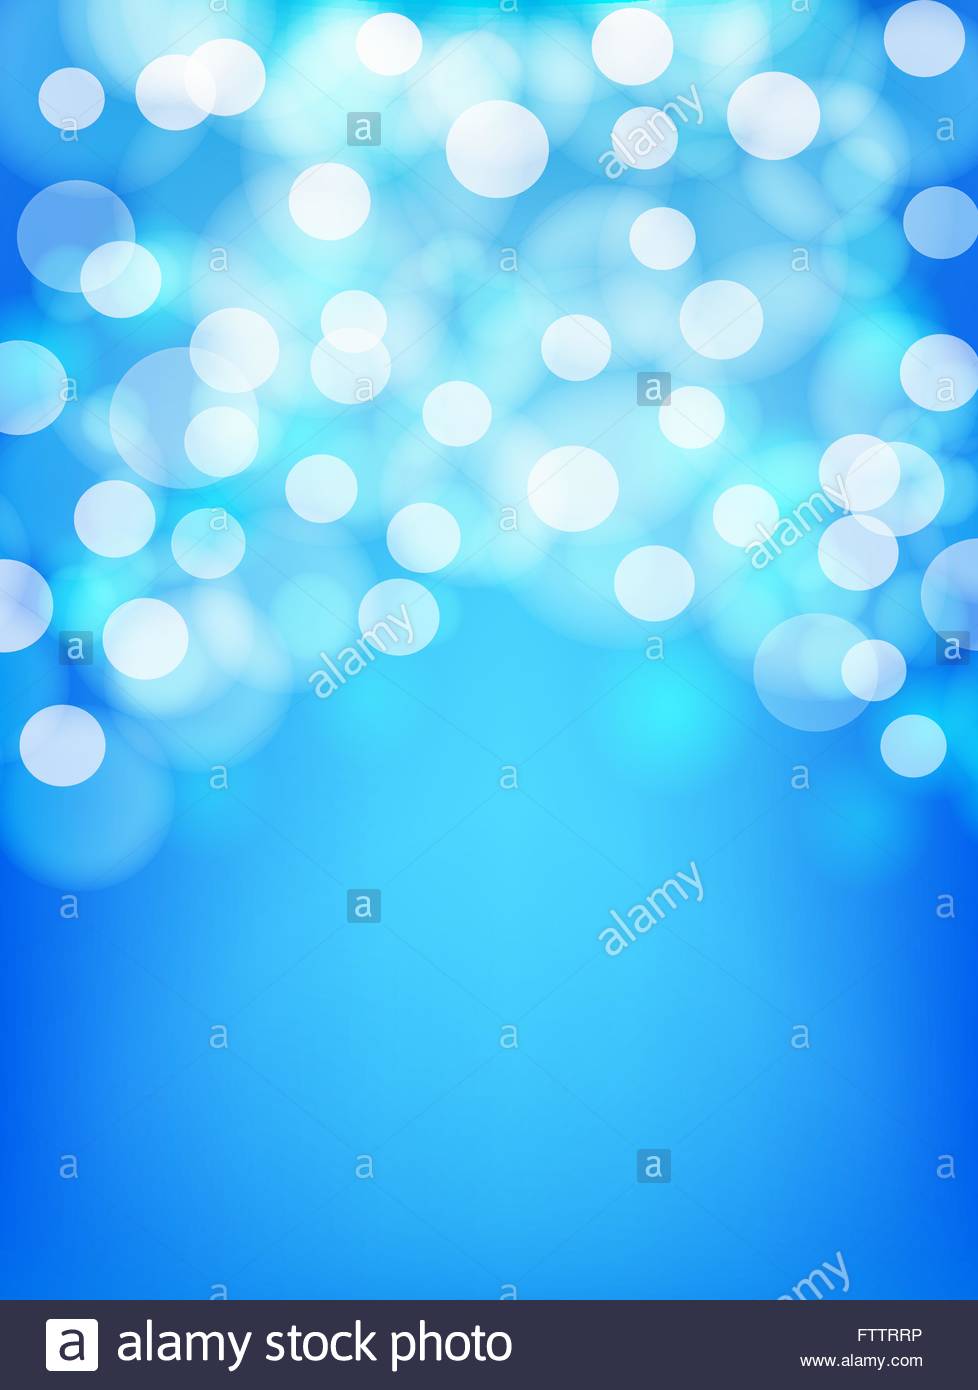 blue abstract blurred background vector vertical illustration